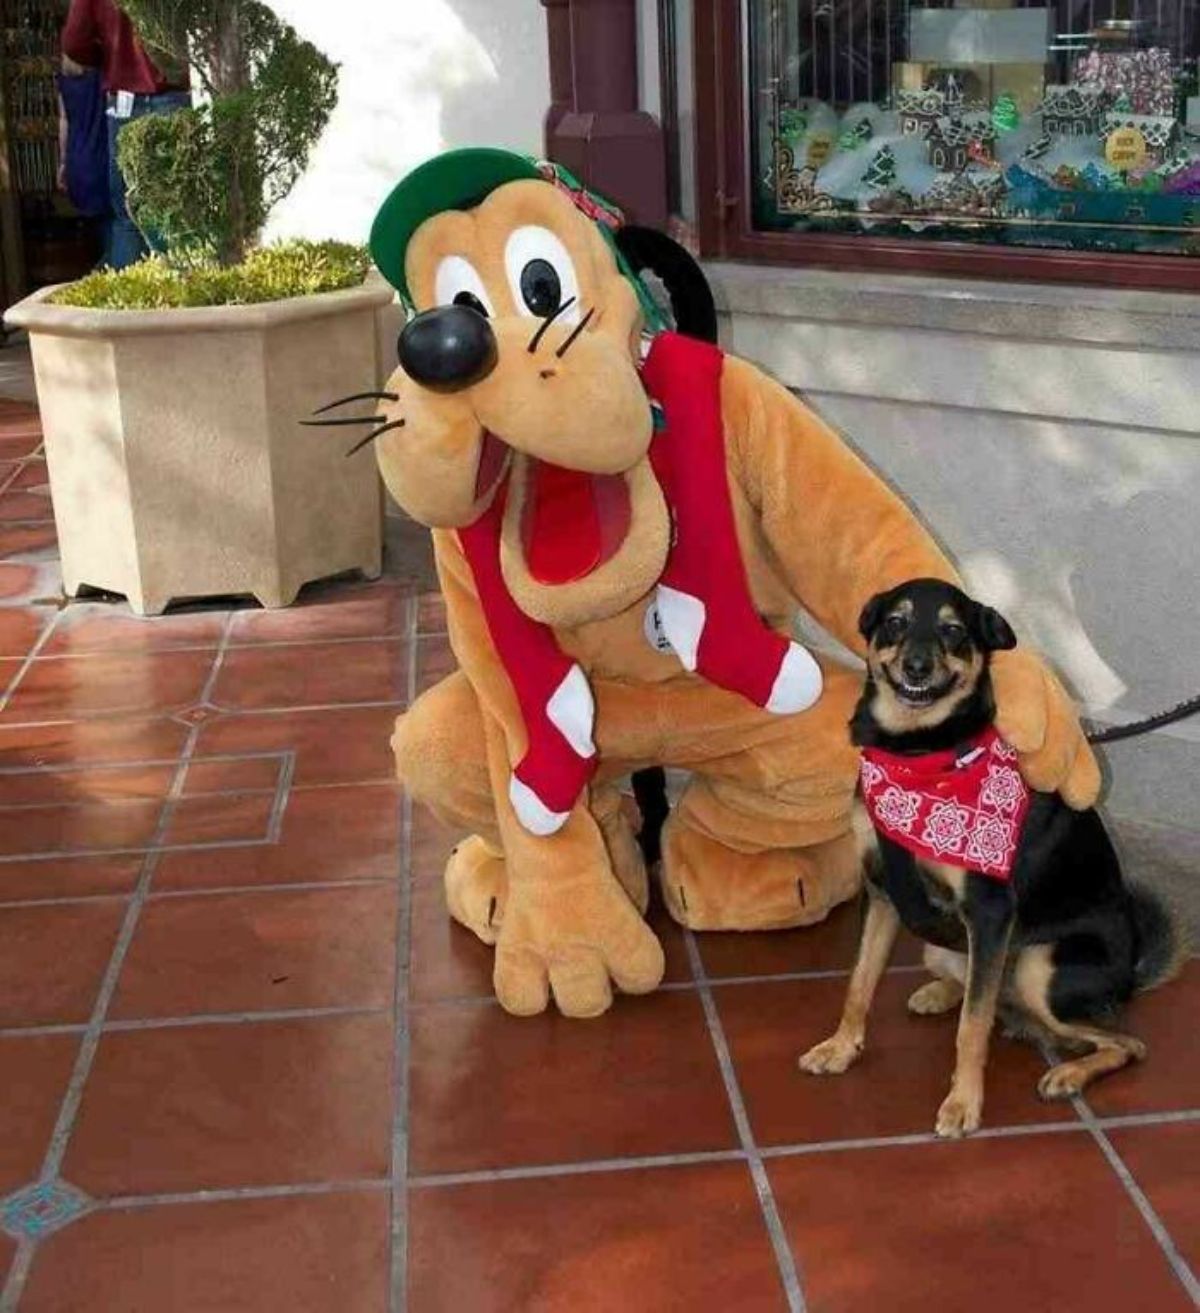 black and brown dog in red and white bandana sitting next to a person in a Goofy character suit